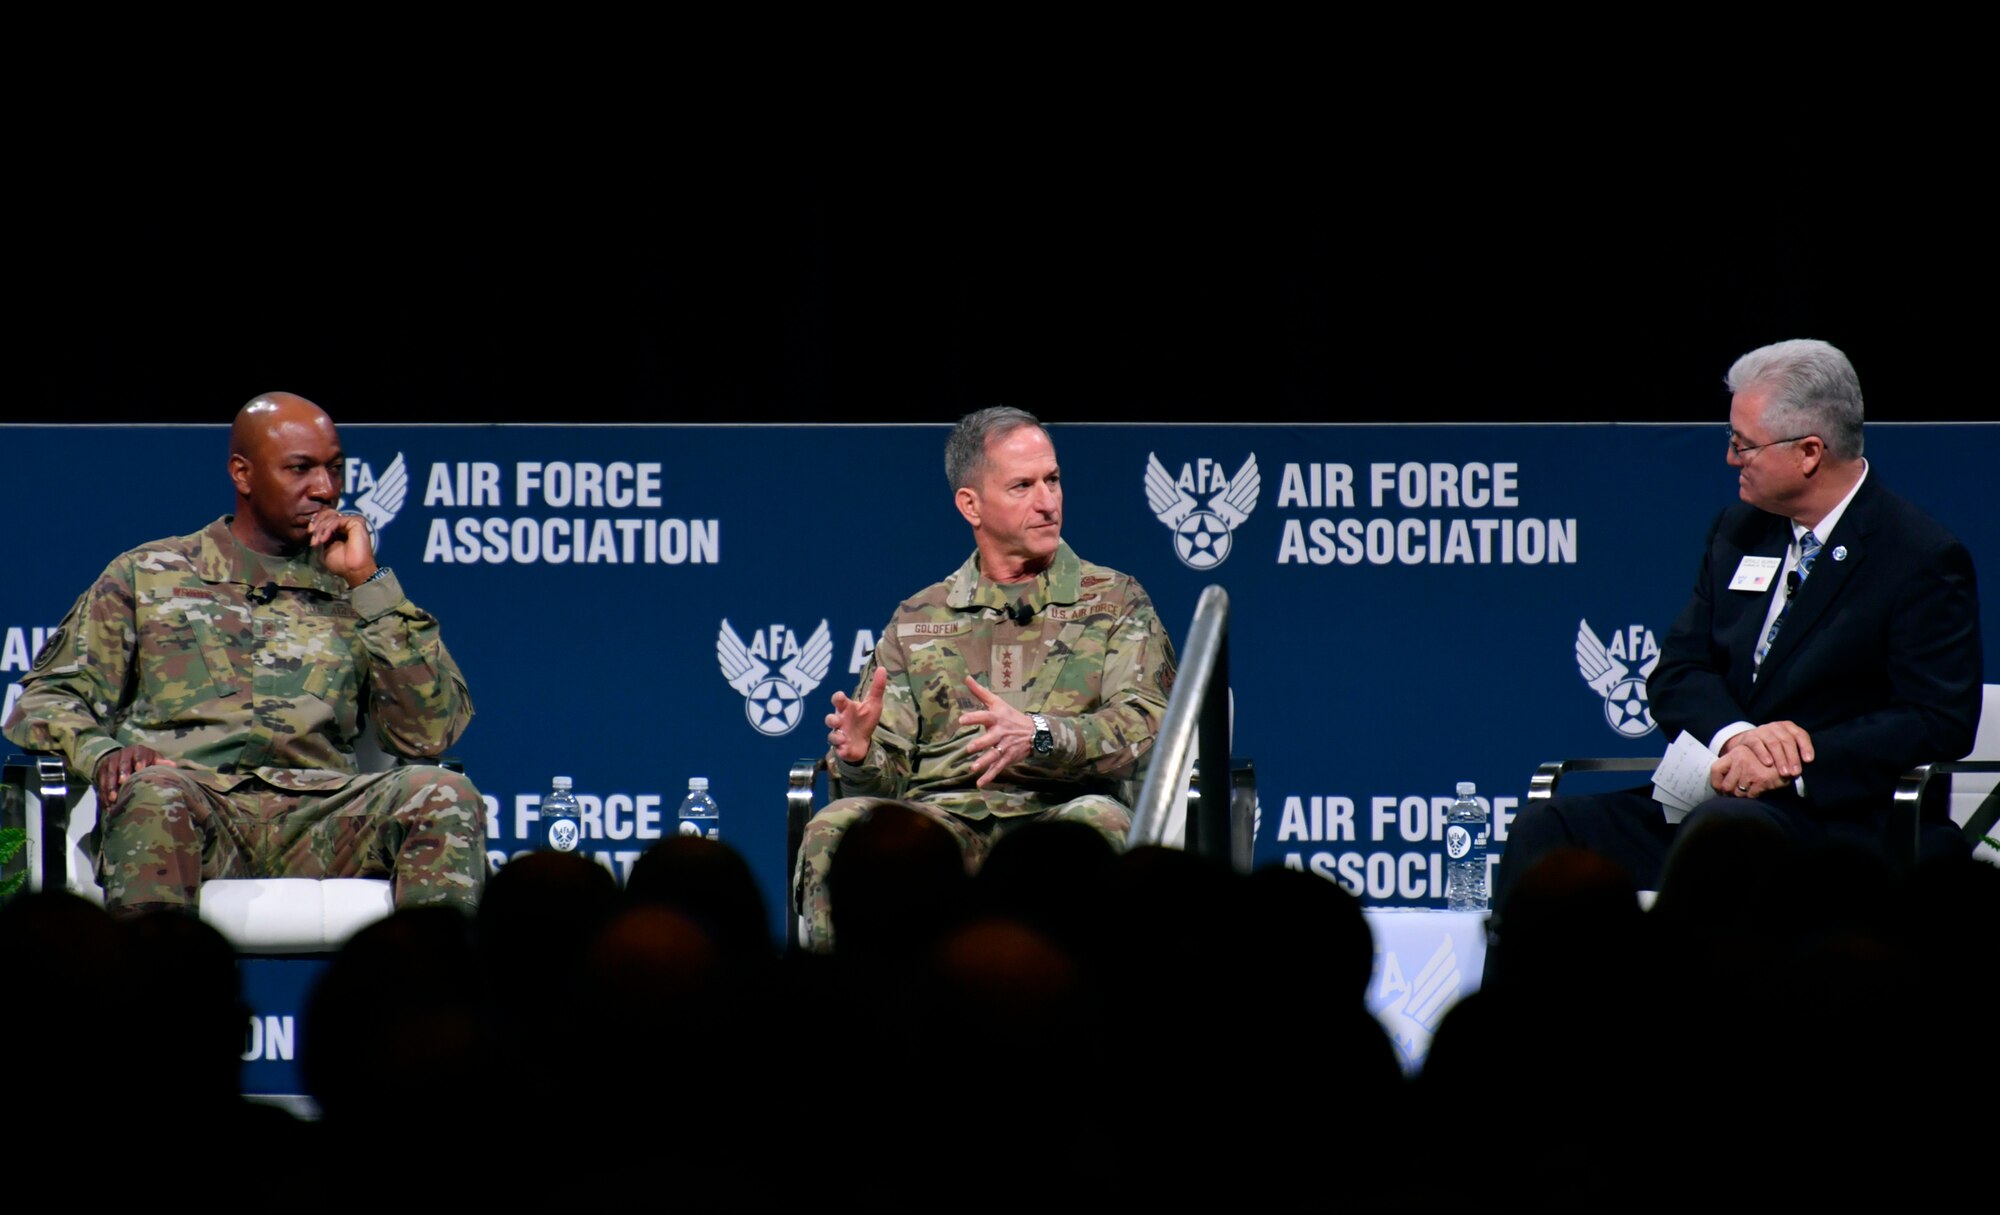 Air Force Chief of Staff Gen. David L. Goldfein and Chief Master Sergeant of the Air Force Kaleth O. Wright participate in a sit down discussion during the Air Force Association's Air Warfare Symposium, in Orlando, Fla., Feb. 27, 2020. The three-day event is a professional development forum that offers the opportunity for Department of Defense personnel to participate in forums, speeches, seminars and workshops with defense industry professionals. (U.S. Air Force photo by Wayne Clark)